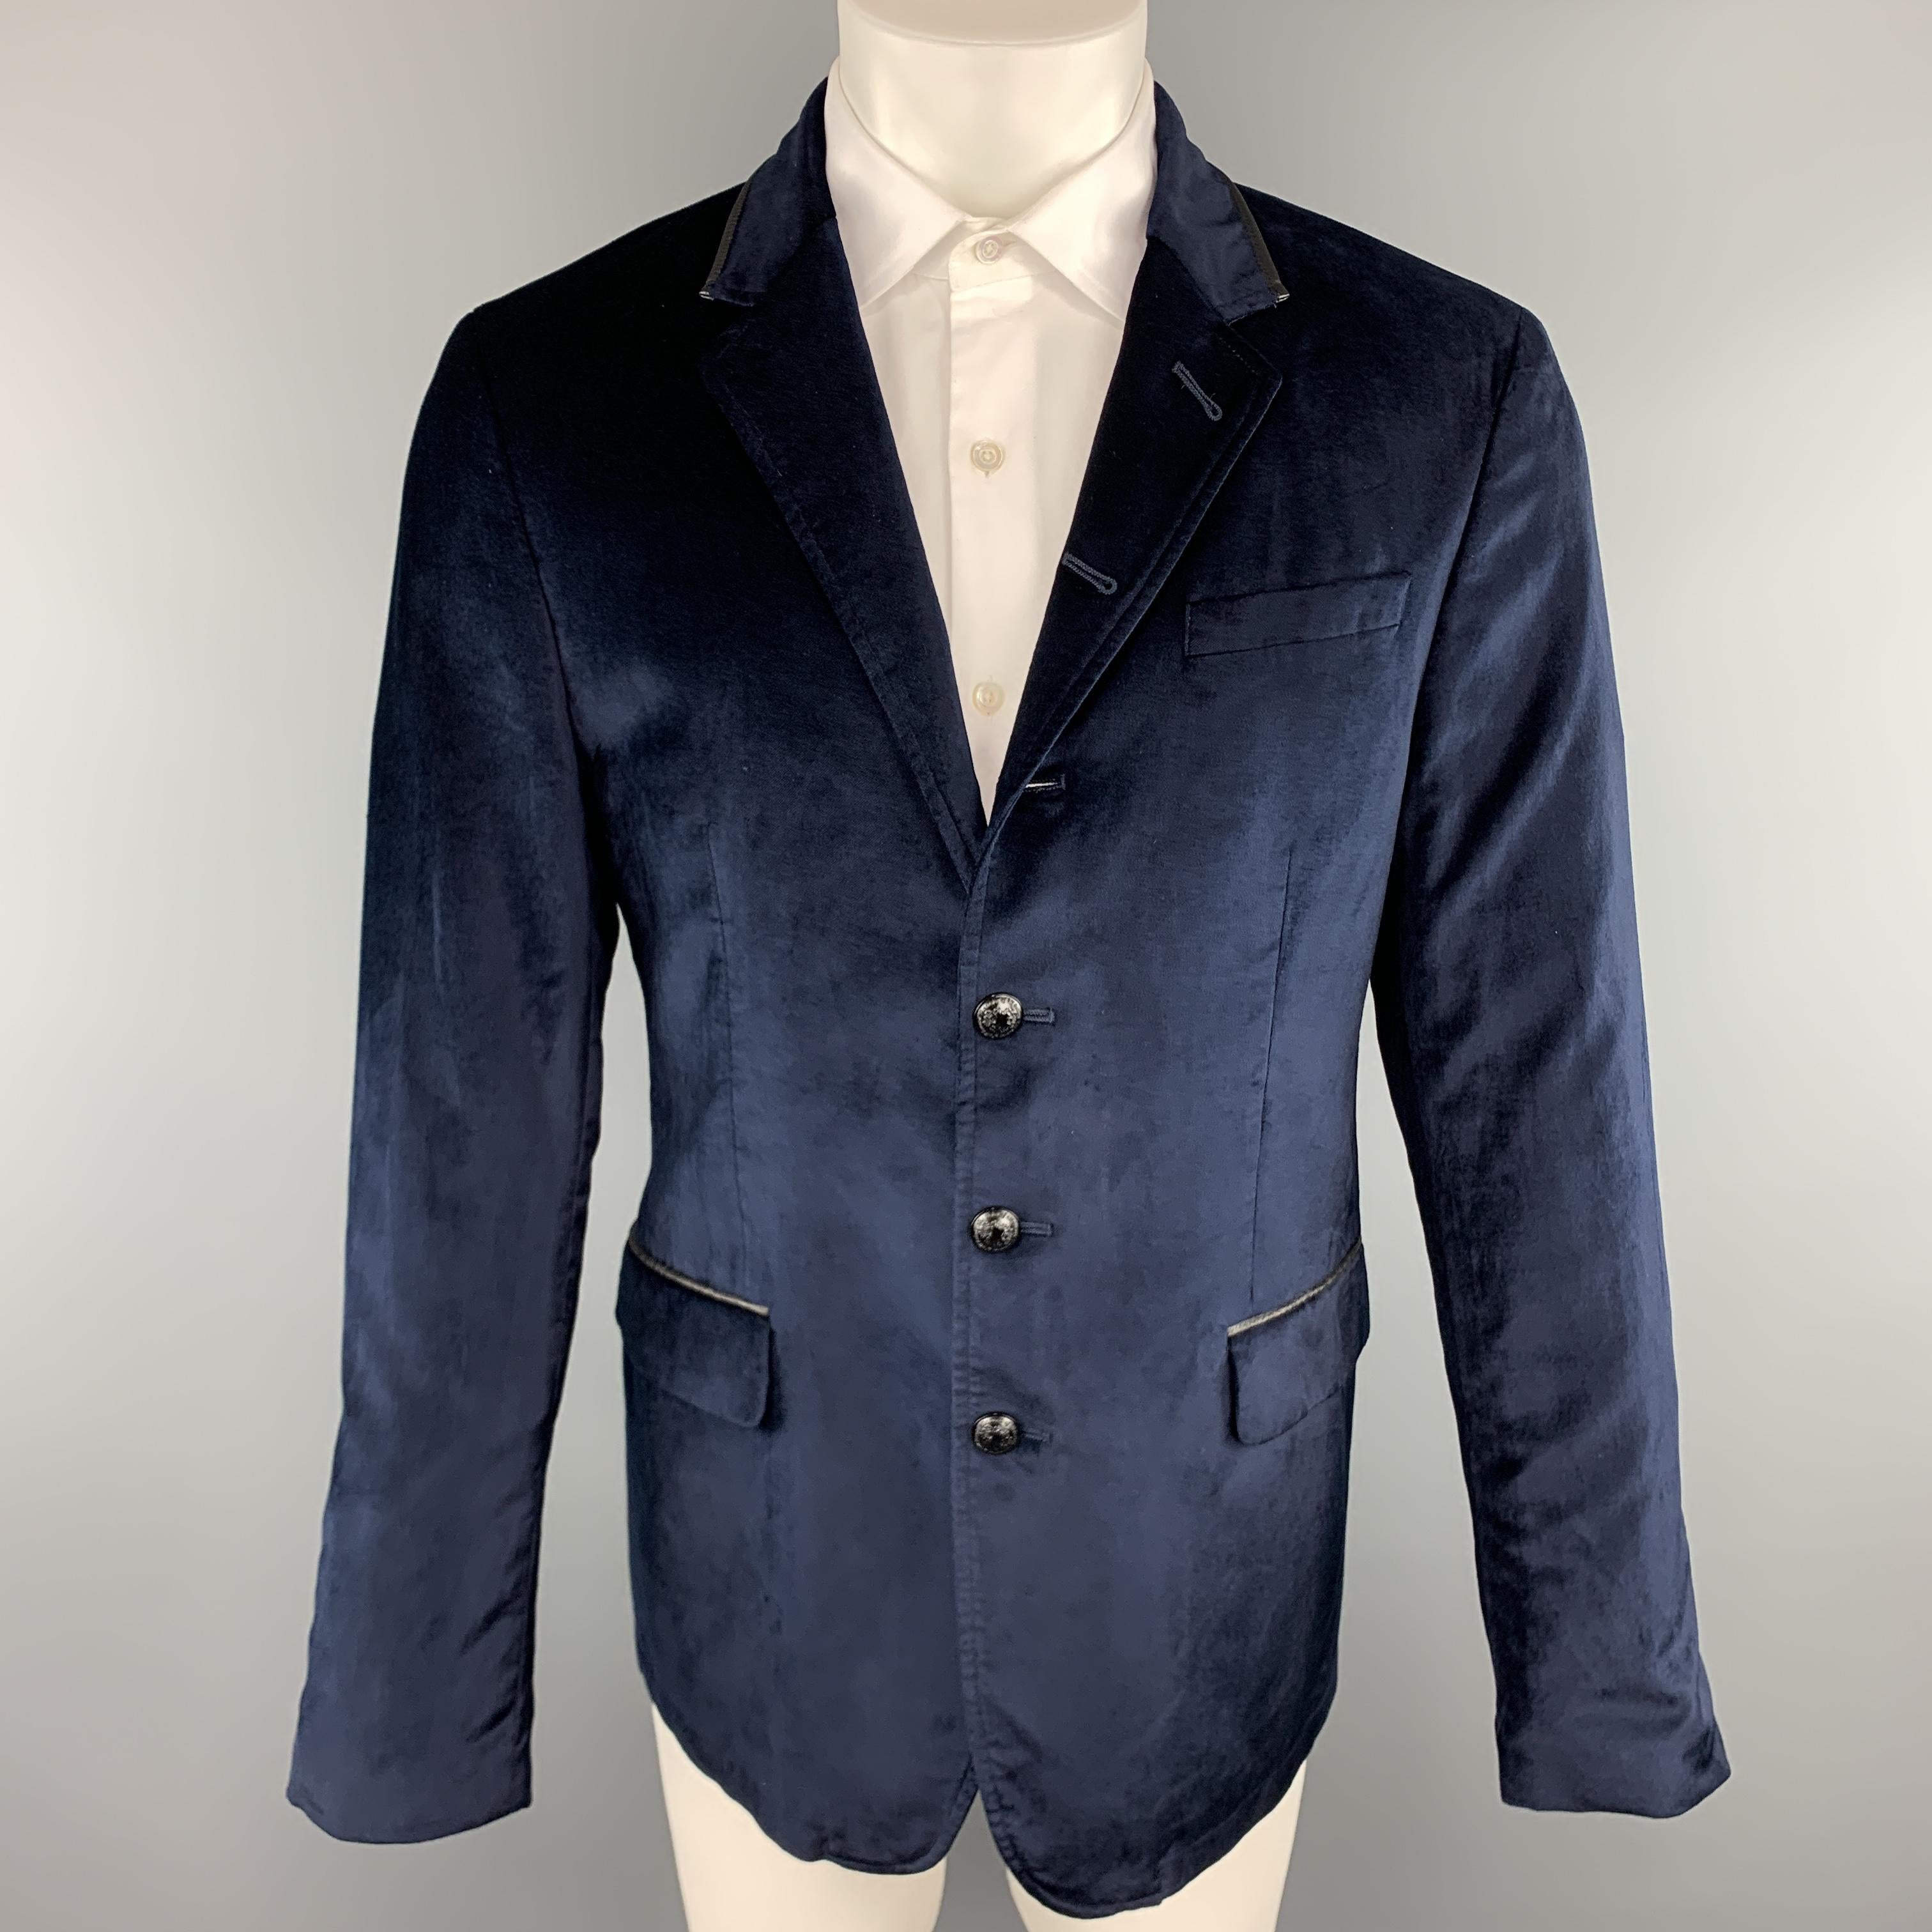 JOHN VARVATOS * USA military style sport coat comes in navy velvet with a high collar, single breasted, six button front with black crest buttons,  and leather trim. 

Very Good Pre-Owned Condition.
Marked: 40

Measurements:

Shoulder: 18 in.
Chest: